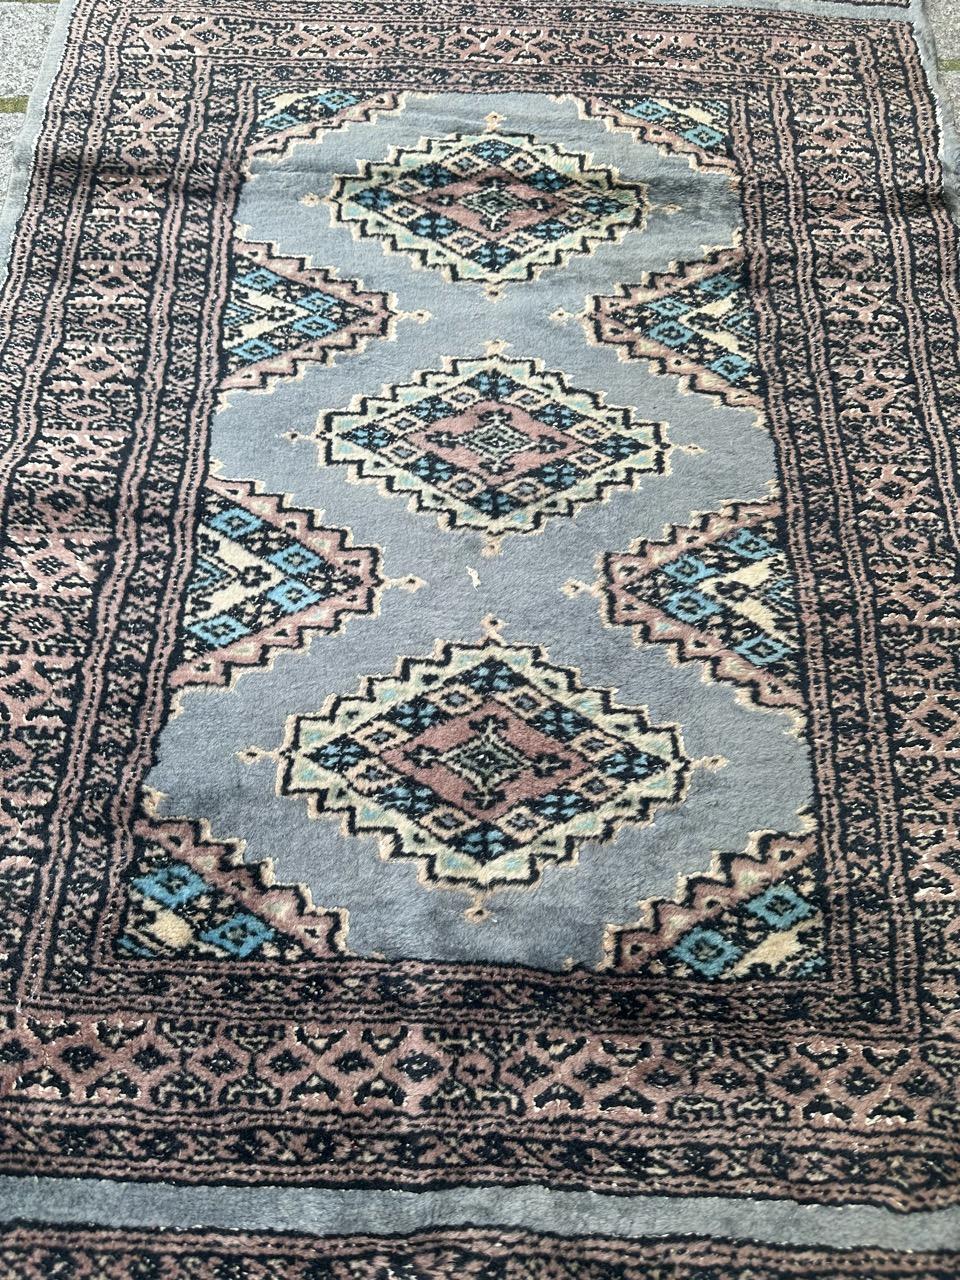 Beautiful late 20th century Pakistani rug with a tribal Turkmen design and nice colours with a blue grey, pink, black and white. Entirely hand knotted with wool and silk on cotton foundation.

✨✨✨
